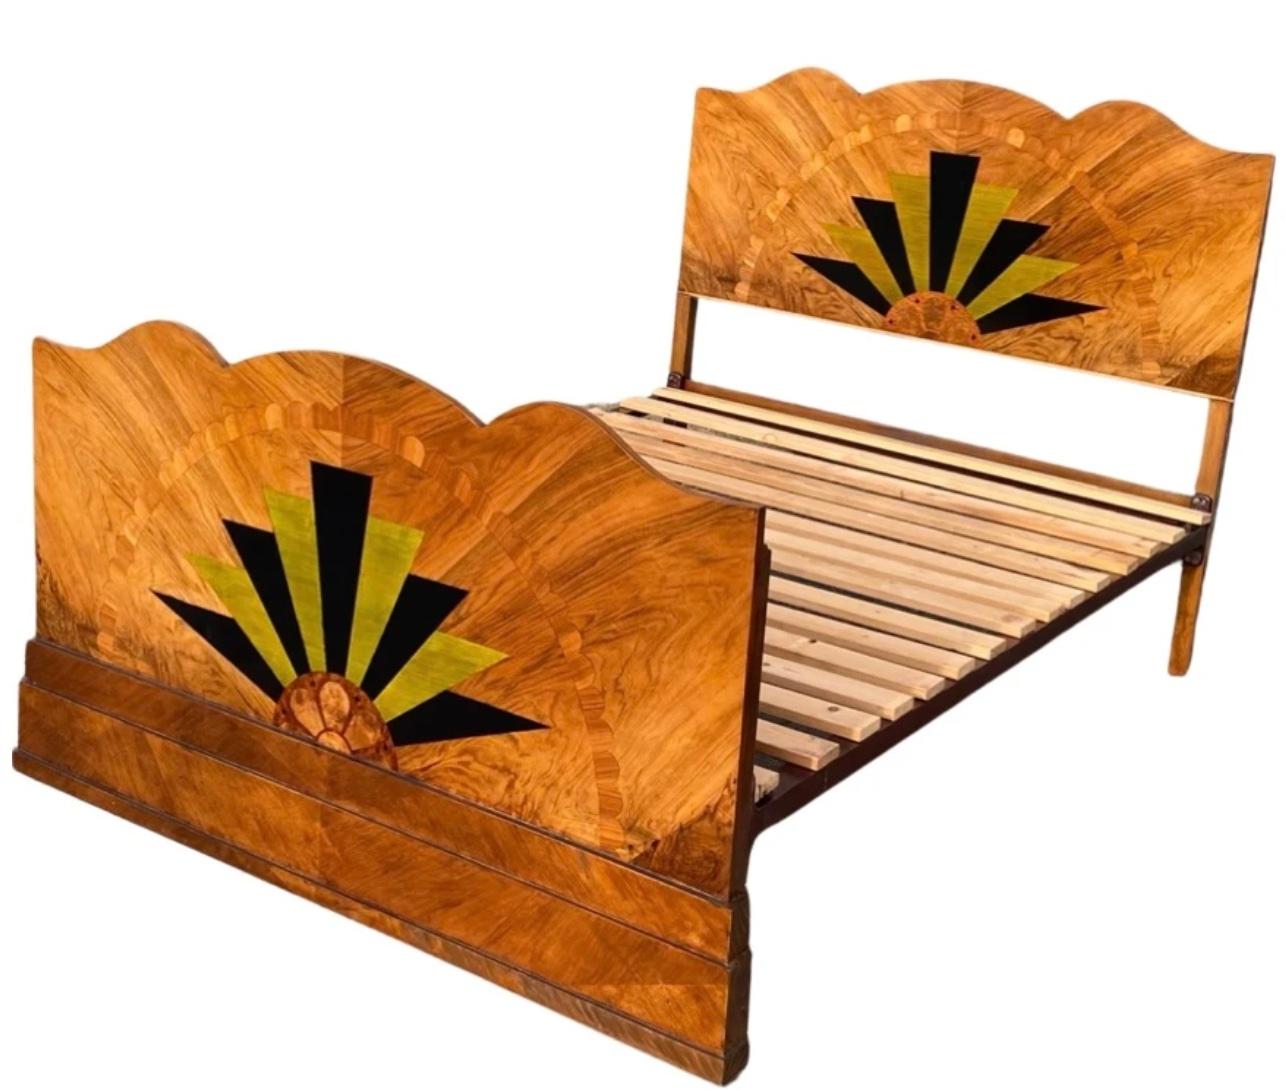 European Stunning 1920’s Art Deco Sunray Inlaid Double Bed For Sale